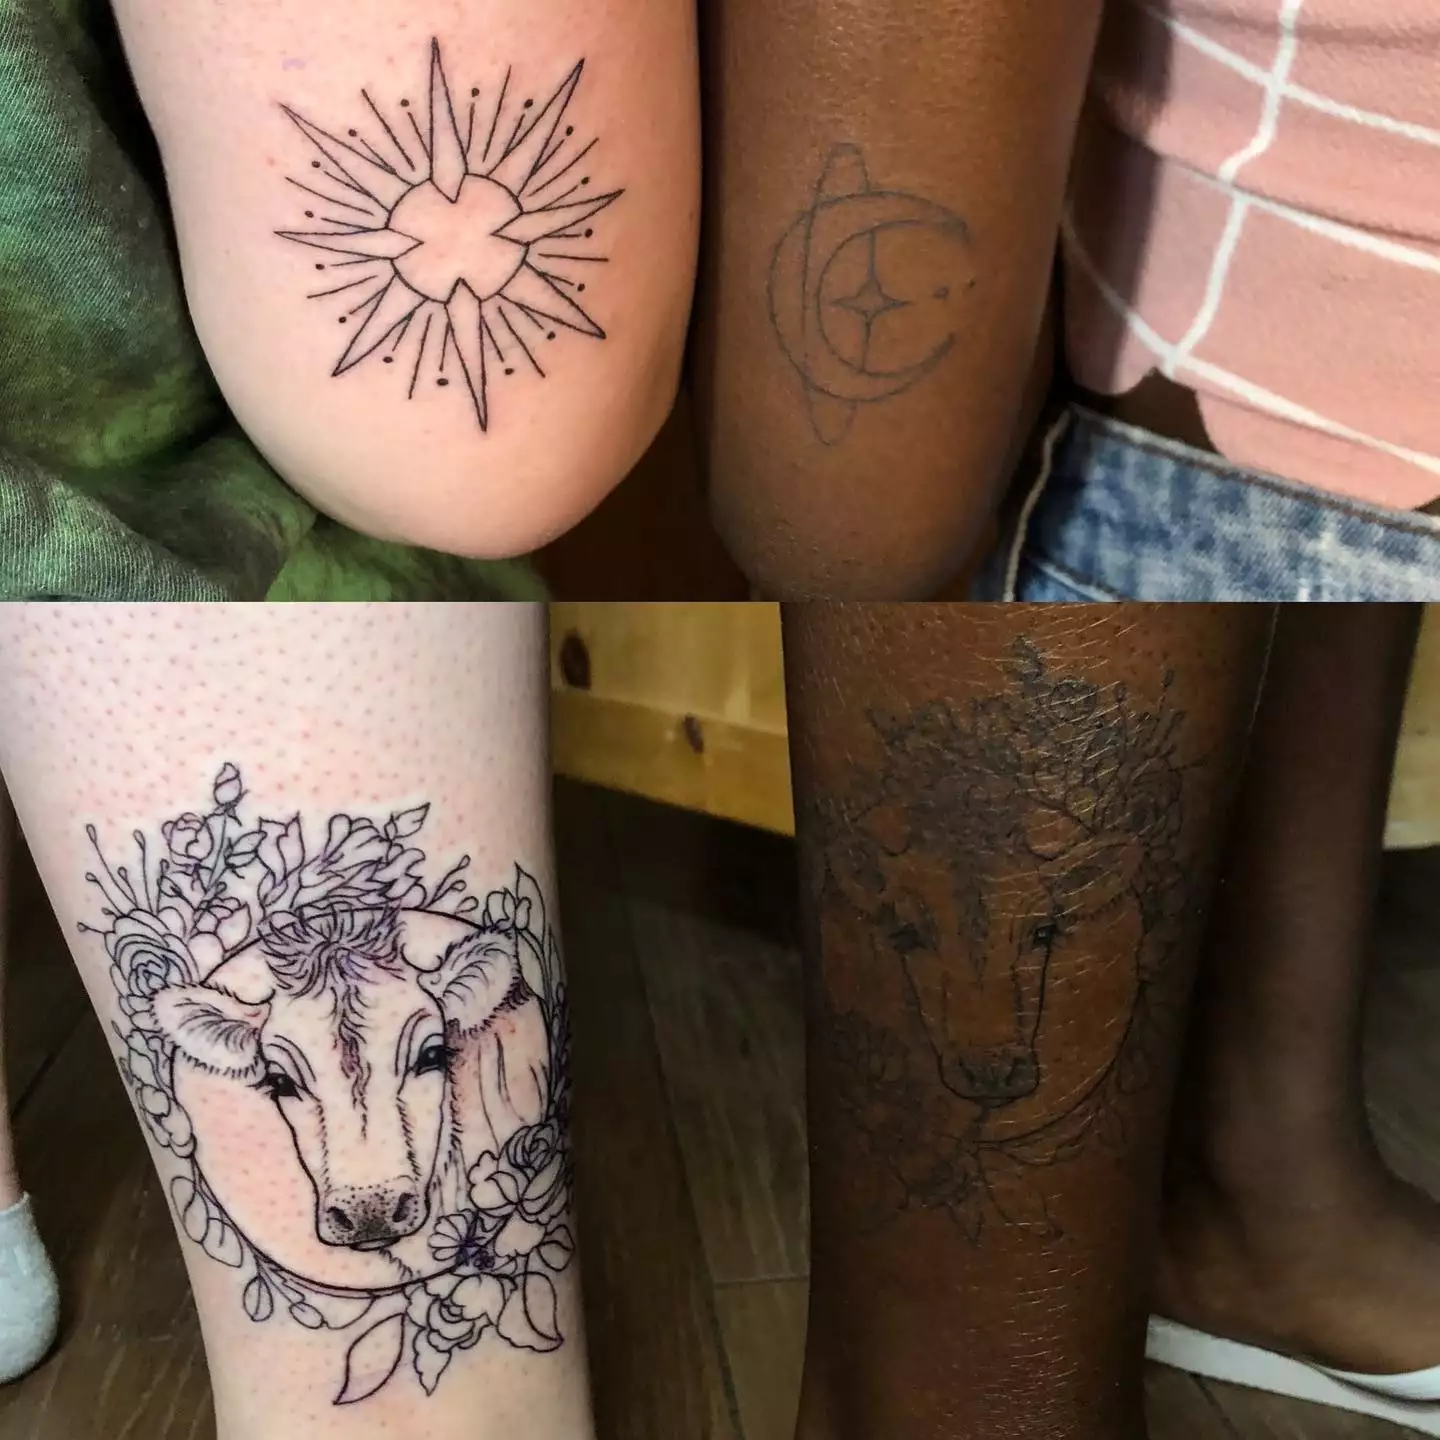 two people with complementary sun and moon tattoos and cow tattoos